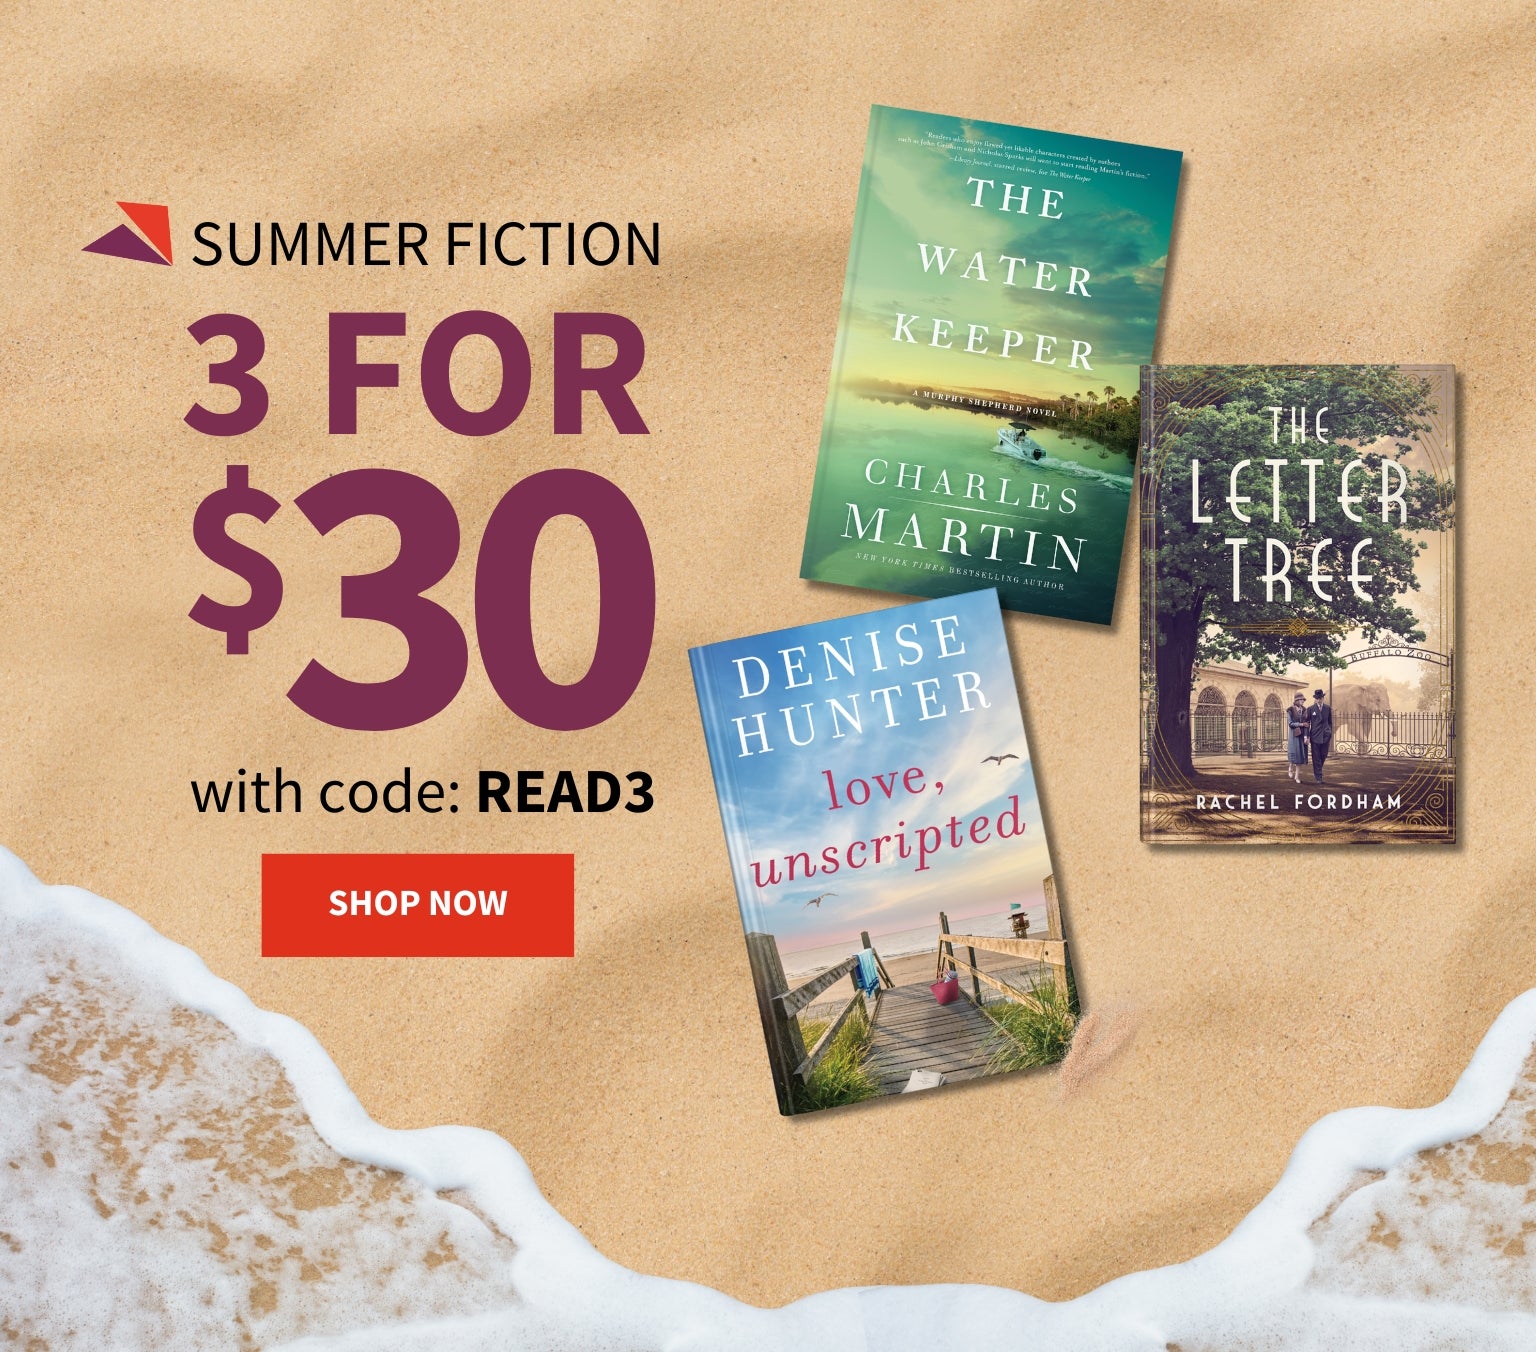 Summer Fiction 3 for $30 with code READ3